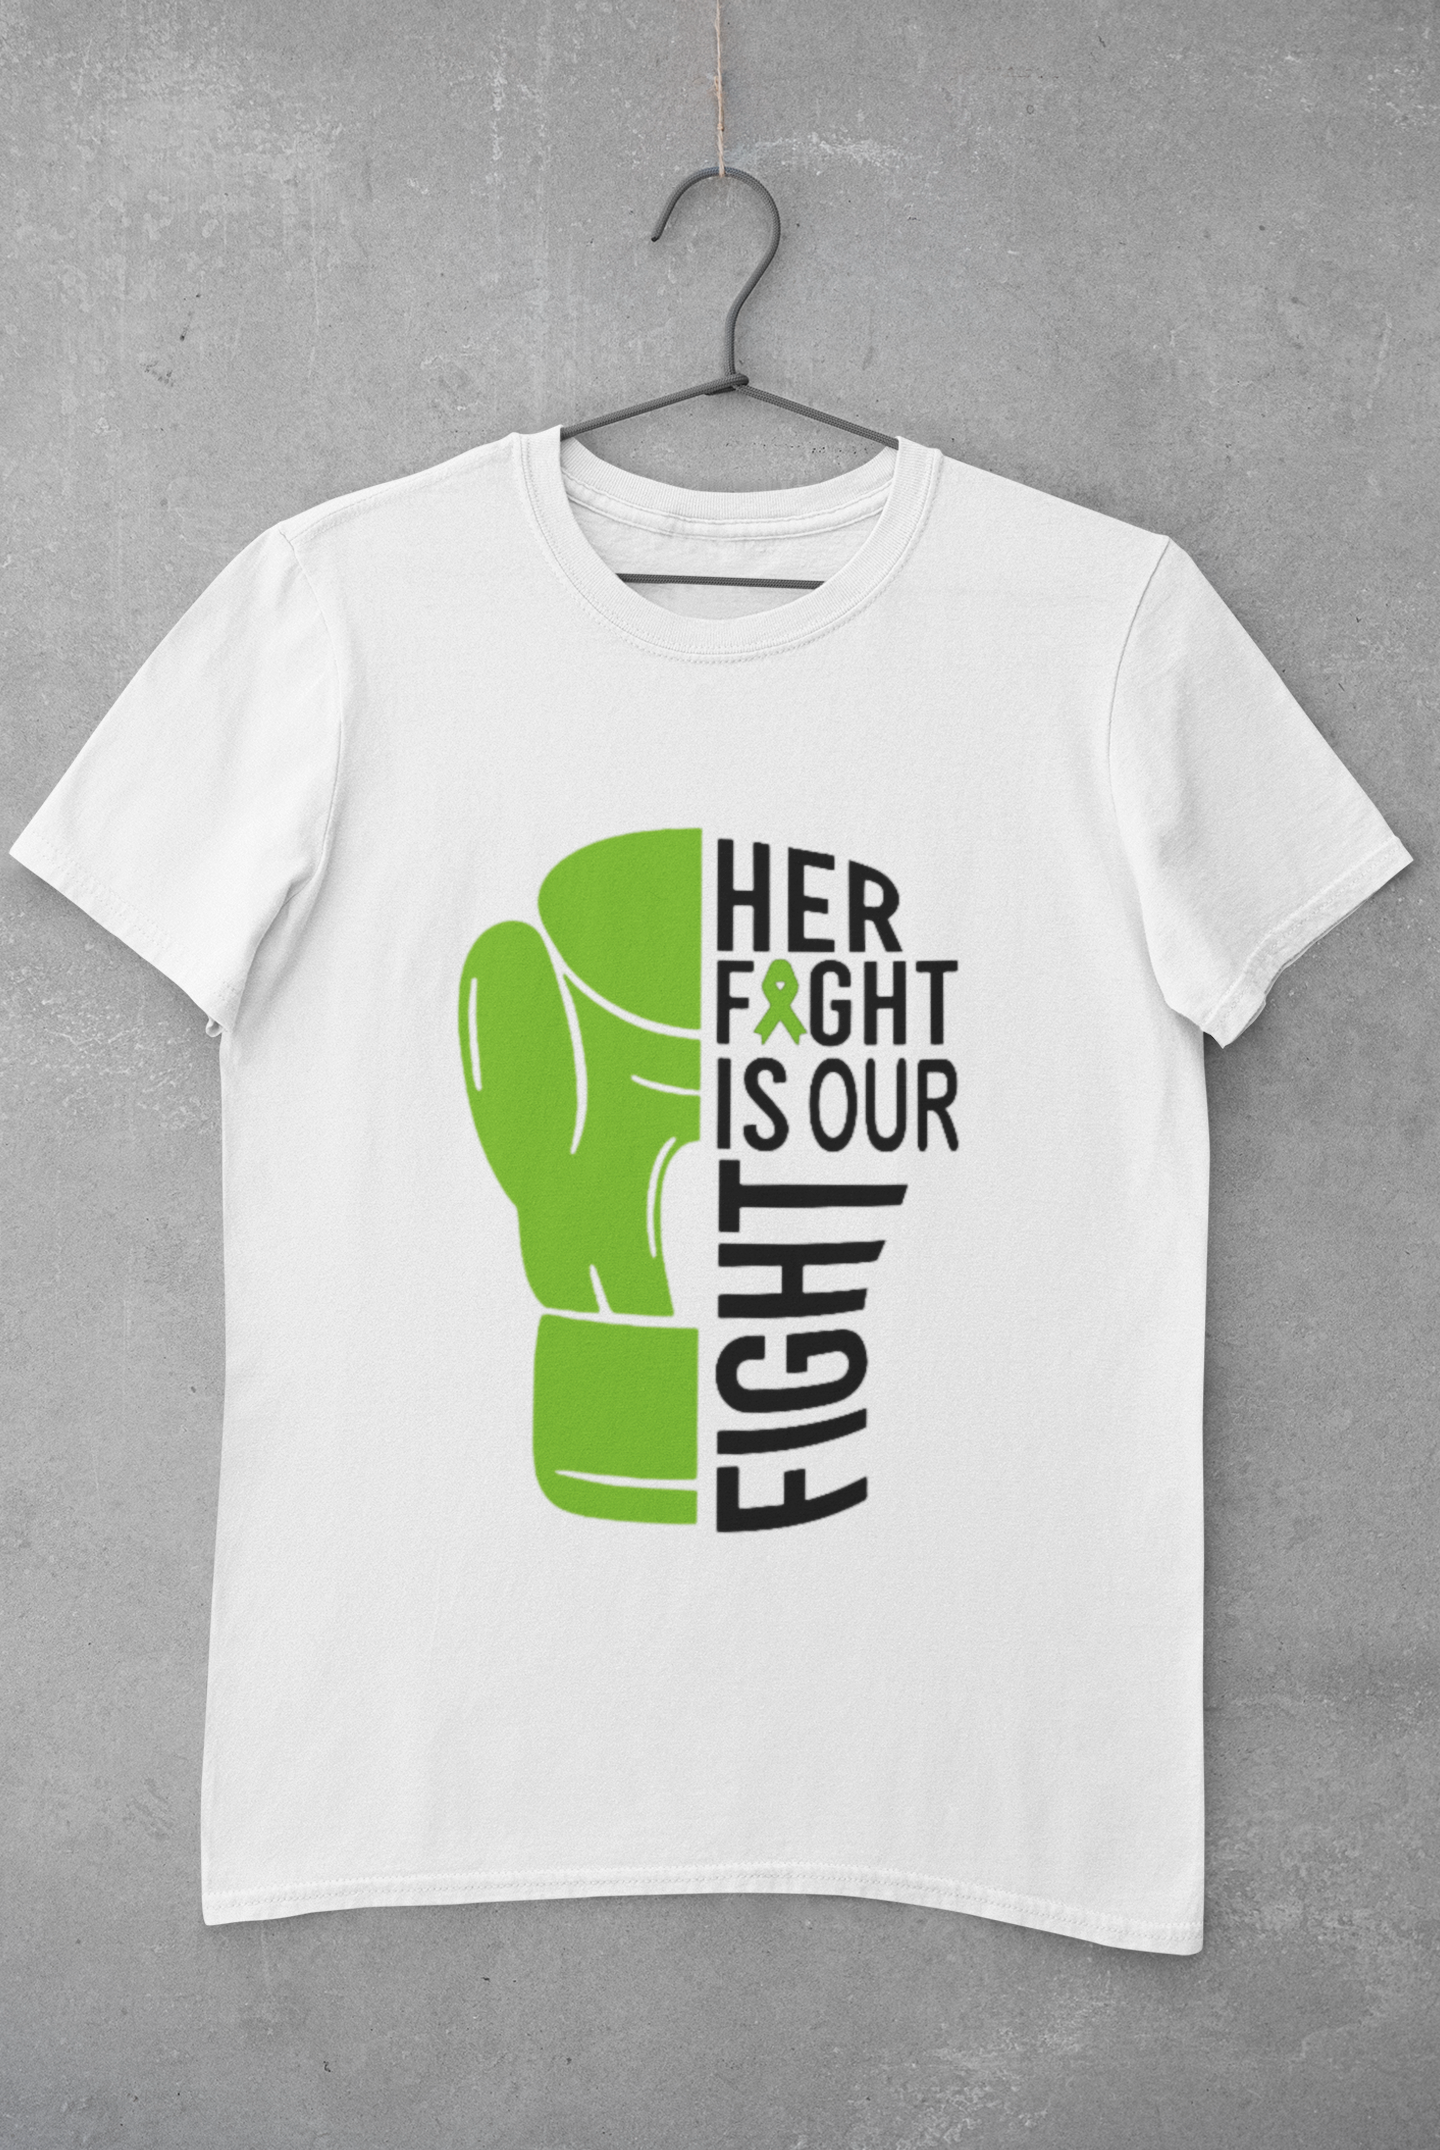 His Fight is Our Fight Lymphoma Awareness T-Shirt or Sweatshirt (Adult)